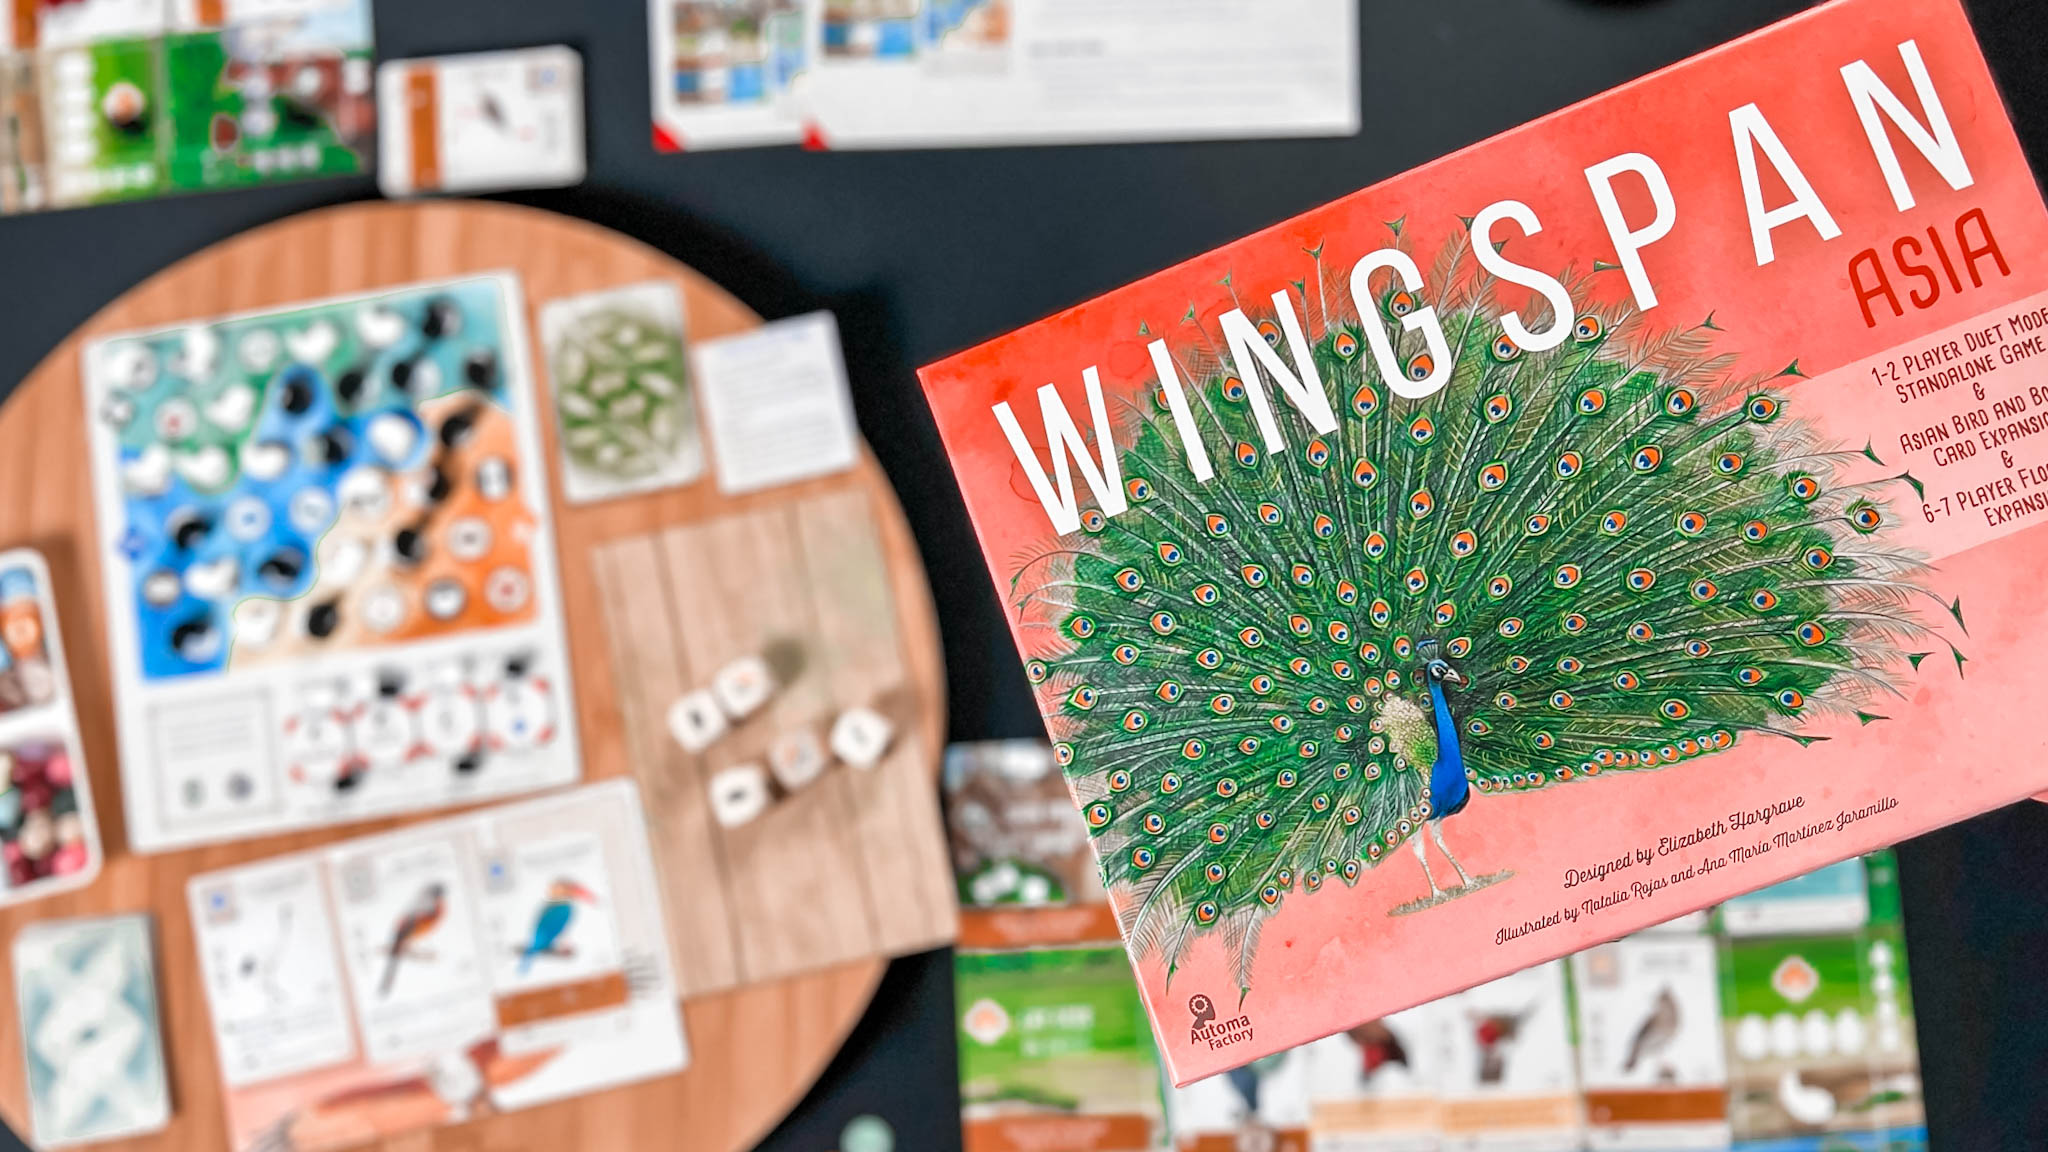 Five reasons Wingspan is the most fantastic boardgame ever created